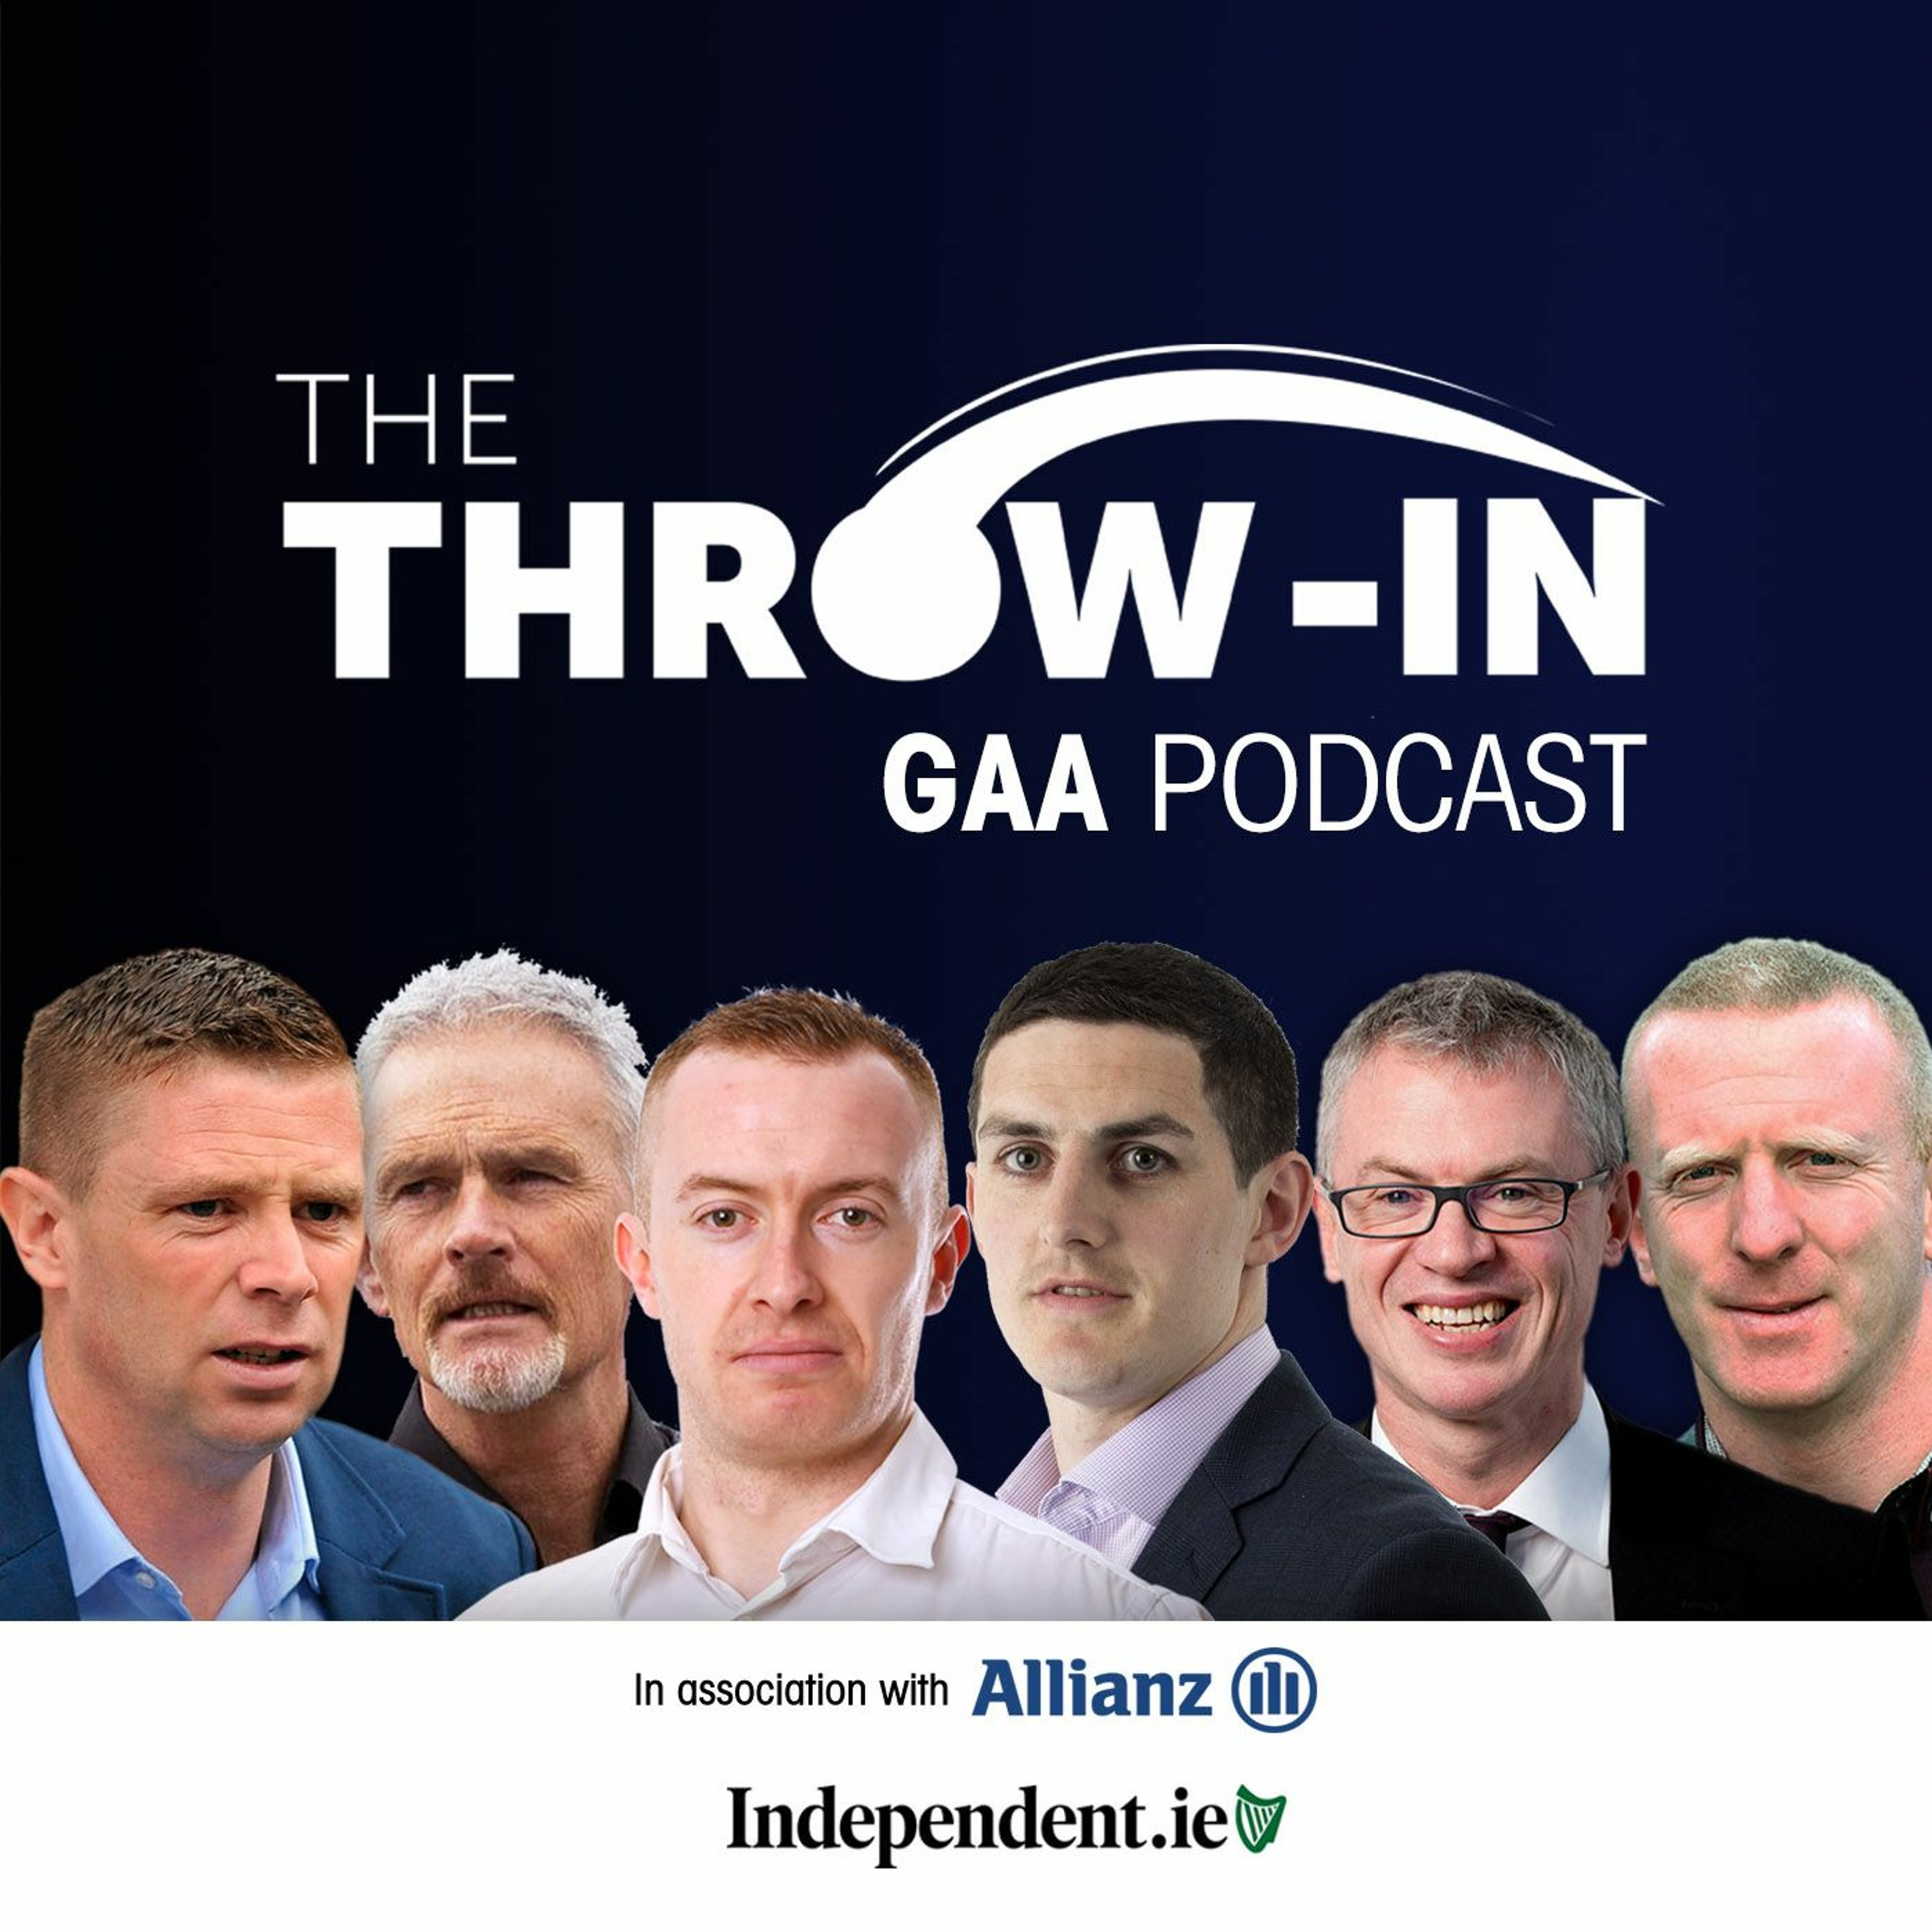 League Finals Preview Live Show with Joe Brolly & Jamesie O’Connor